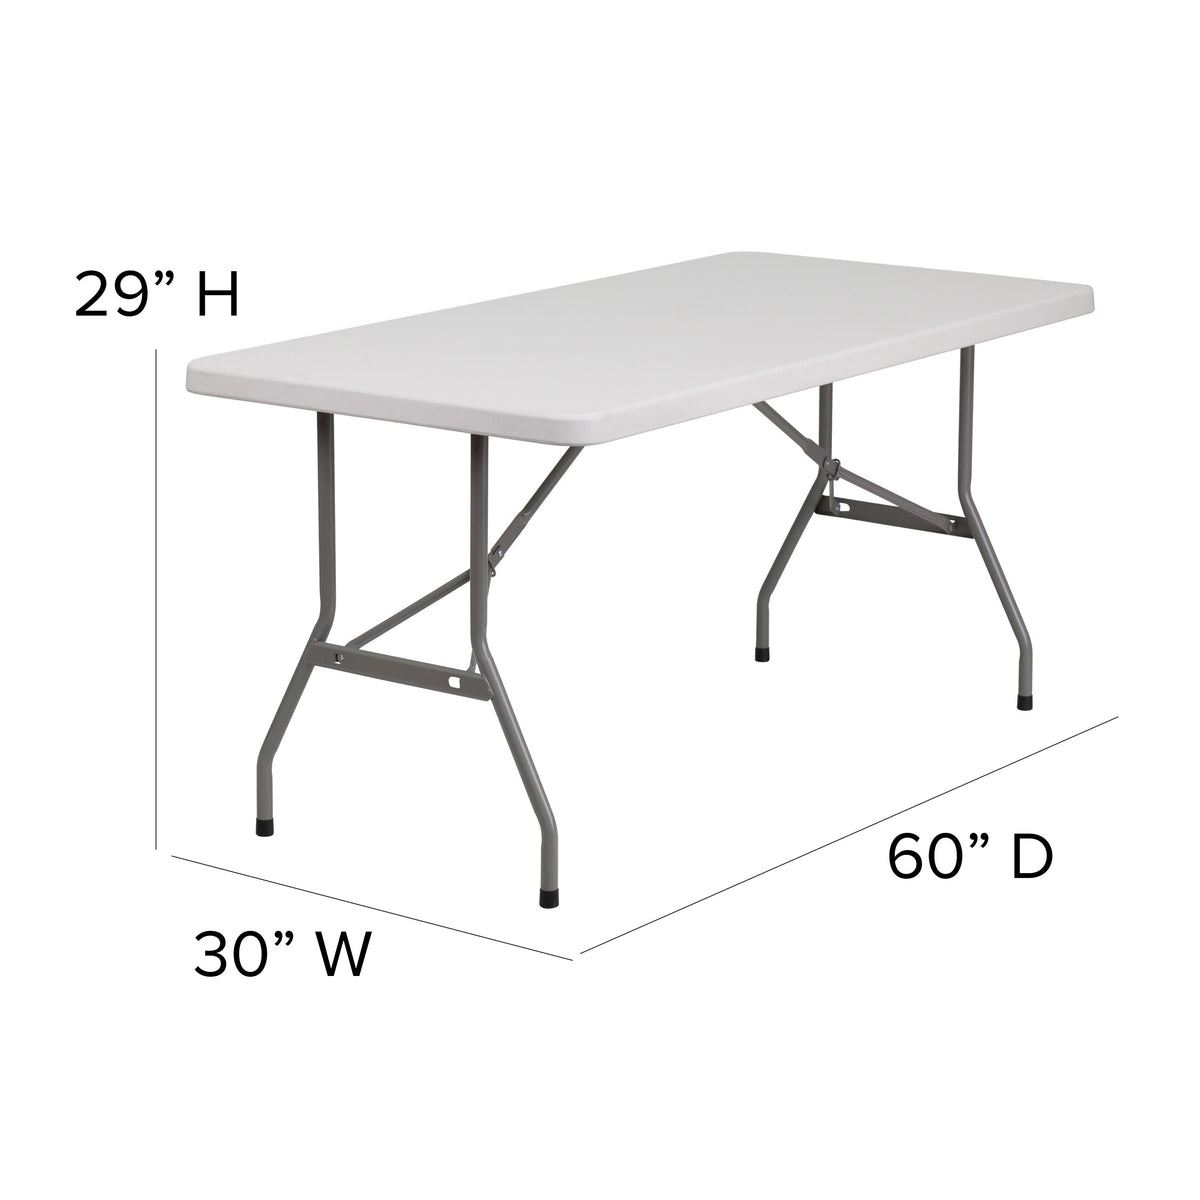 5-Foot Granite White Plastic Folding Table - Banquet / Event Folding Table